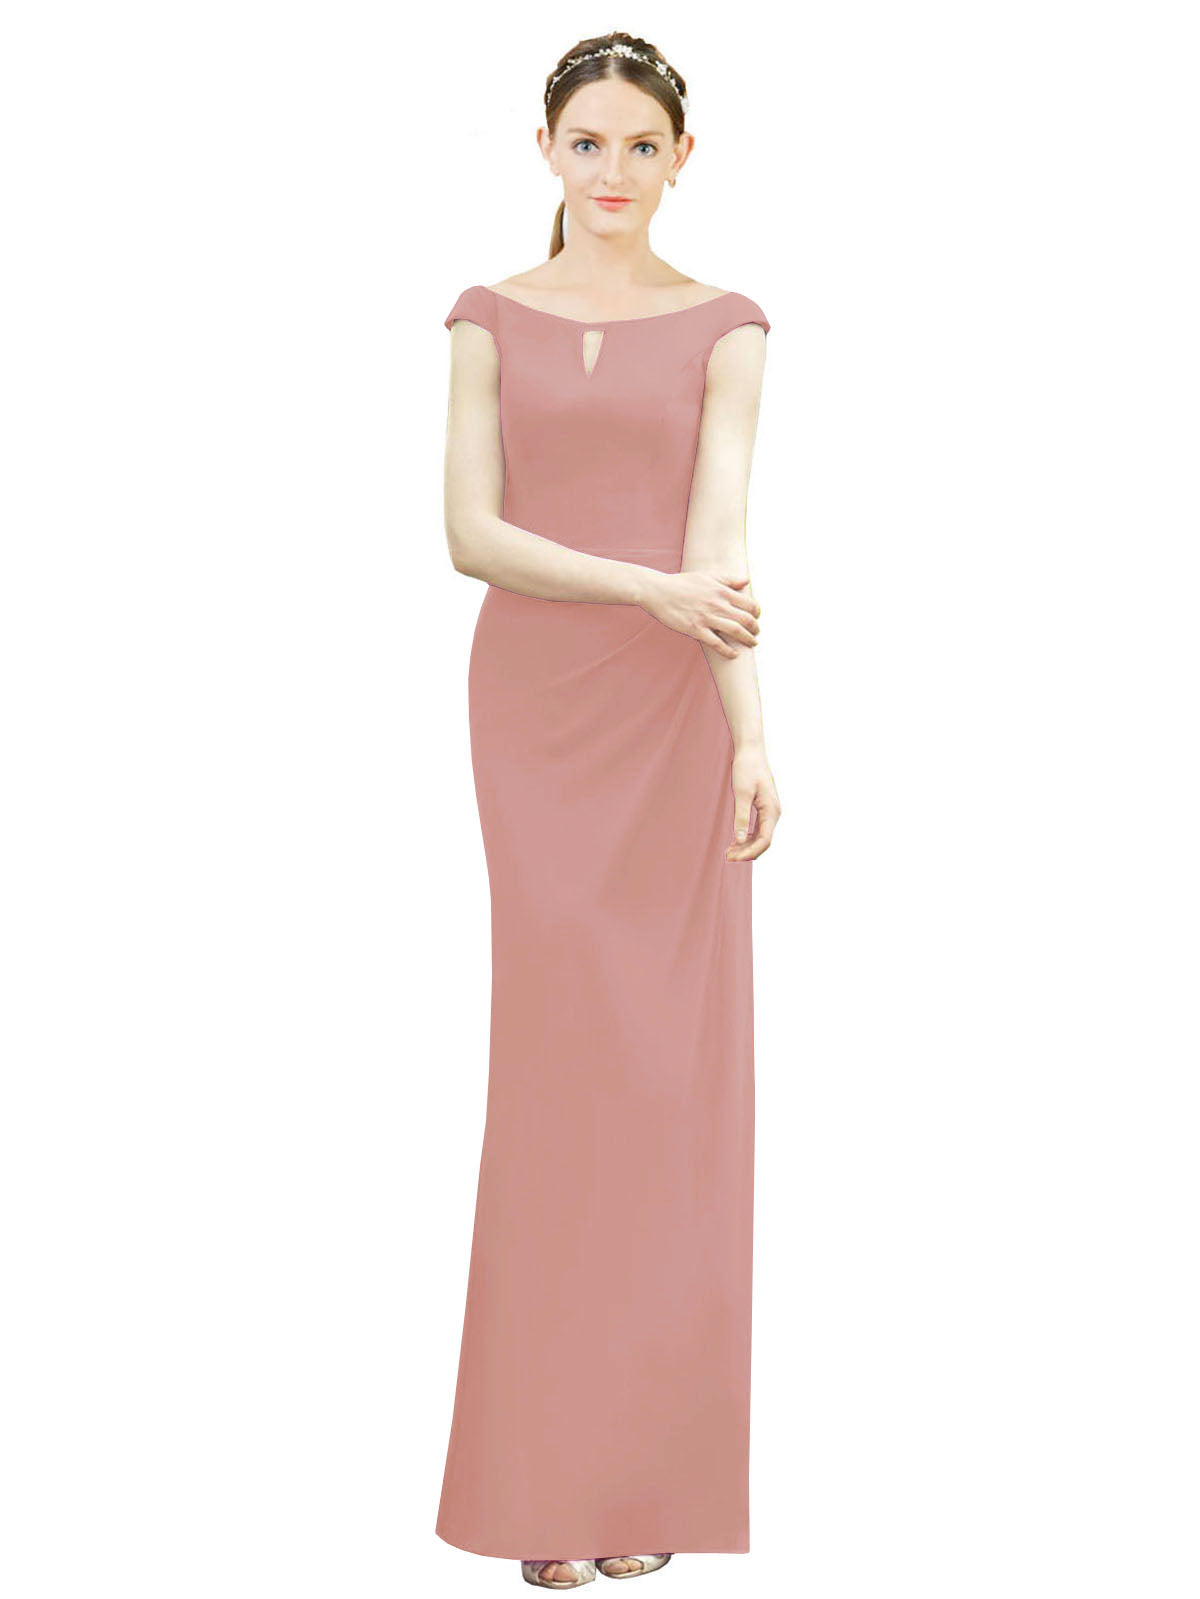 Dusty Pink Mermaid, Fit and Flare Bateau, High Neck Sleeveless Long Bridesmaid Dress Emilee 